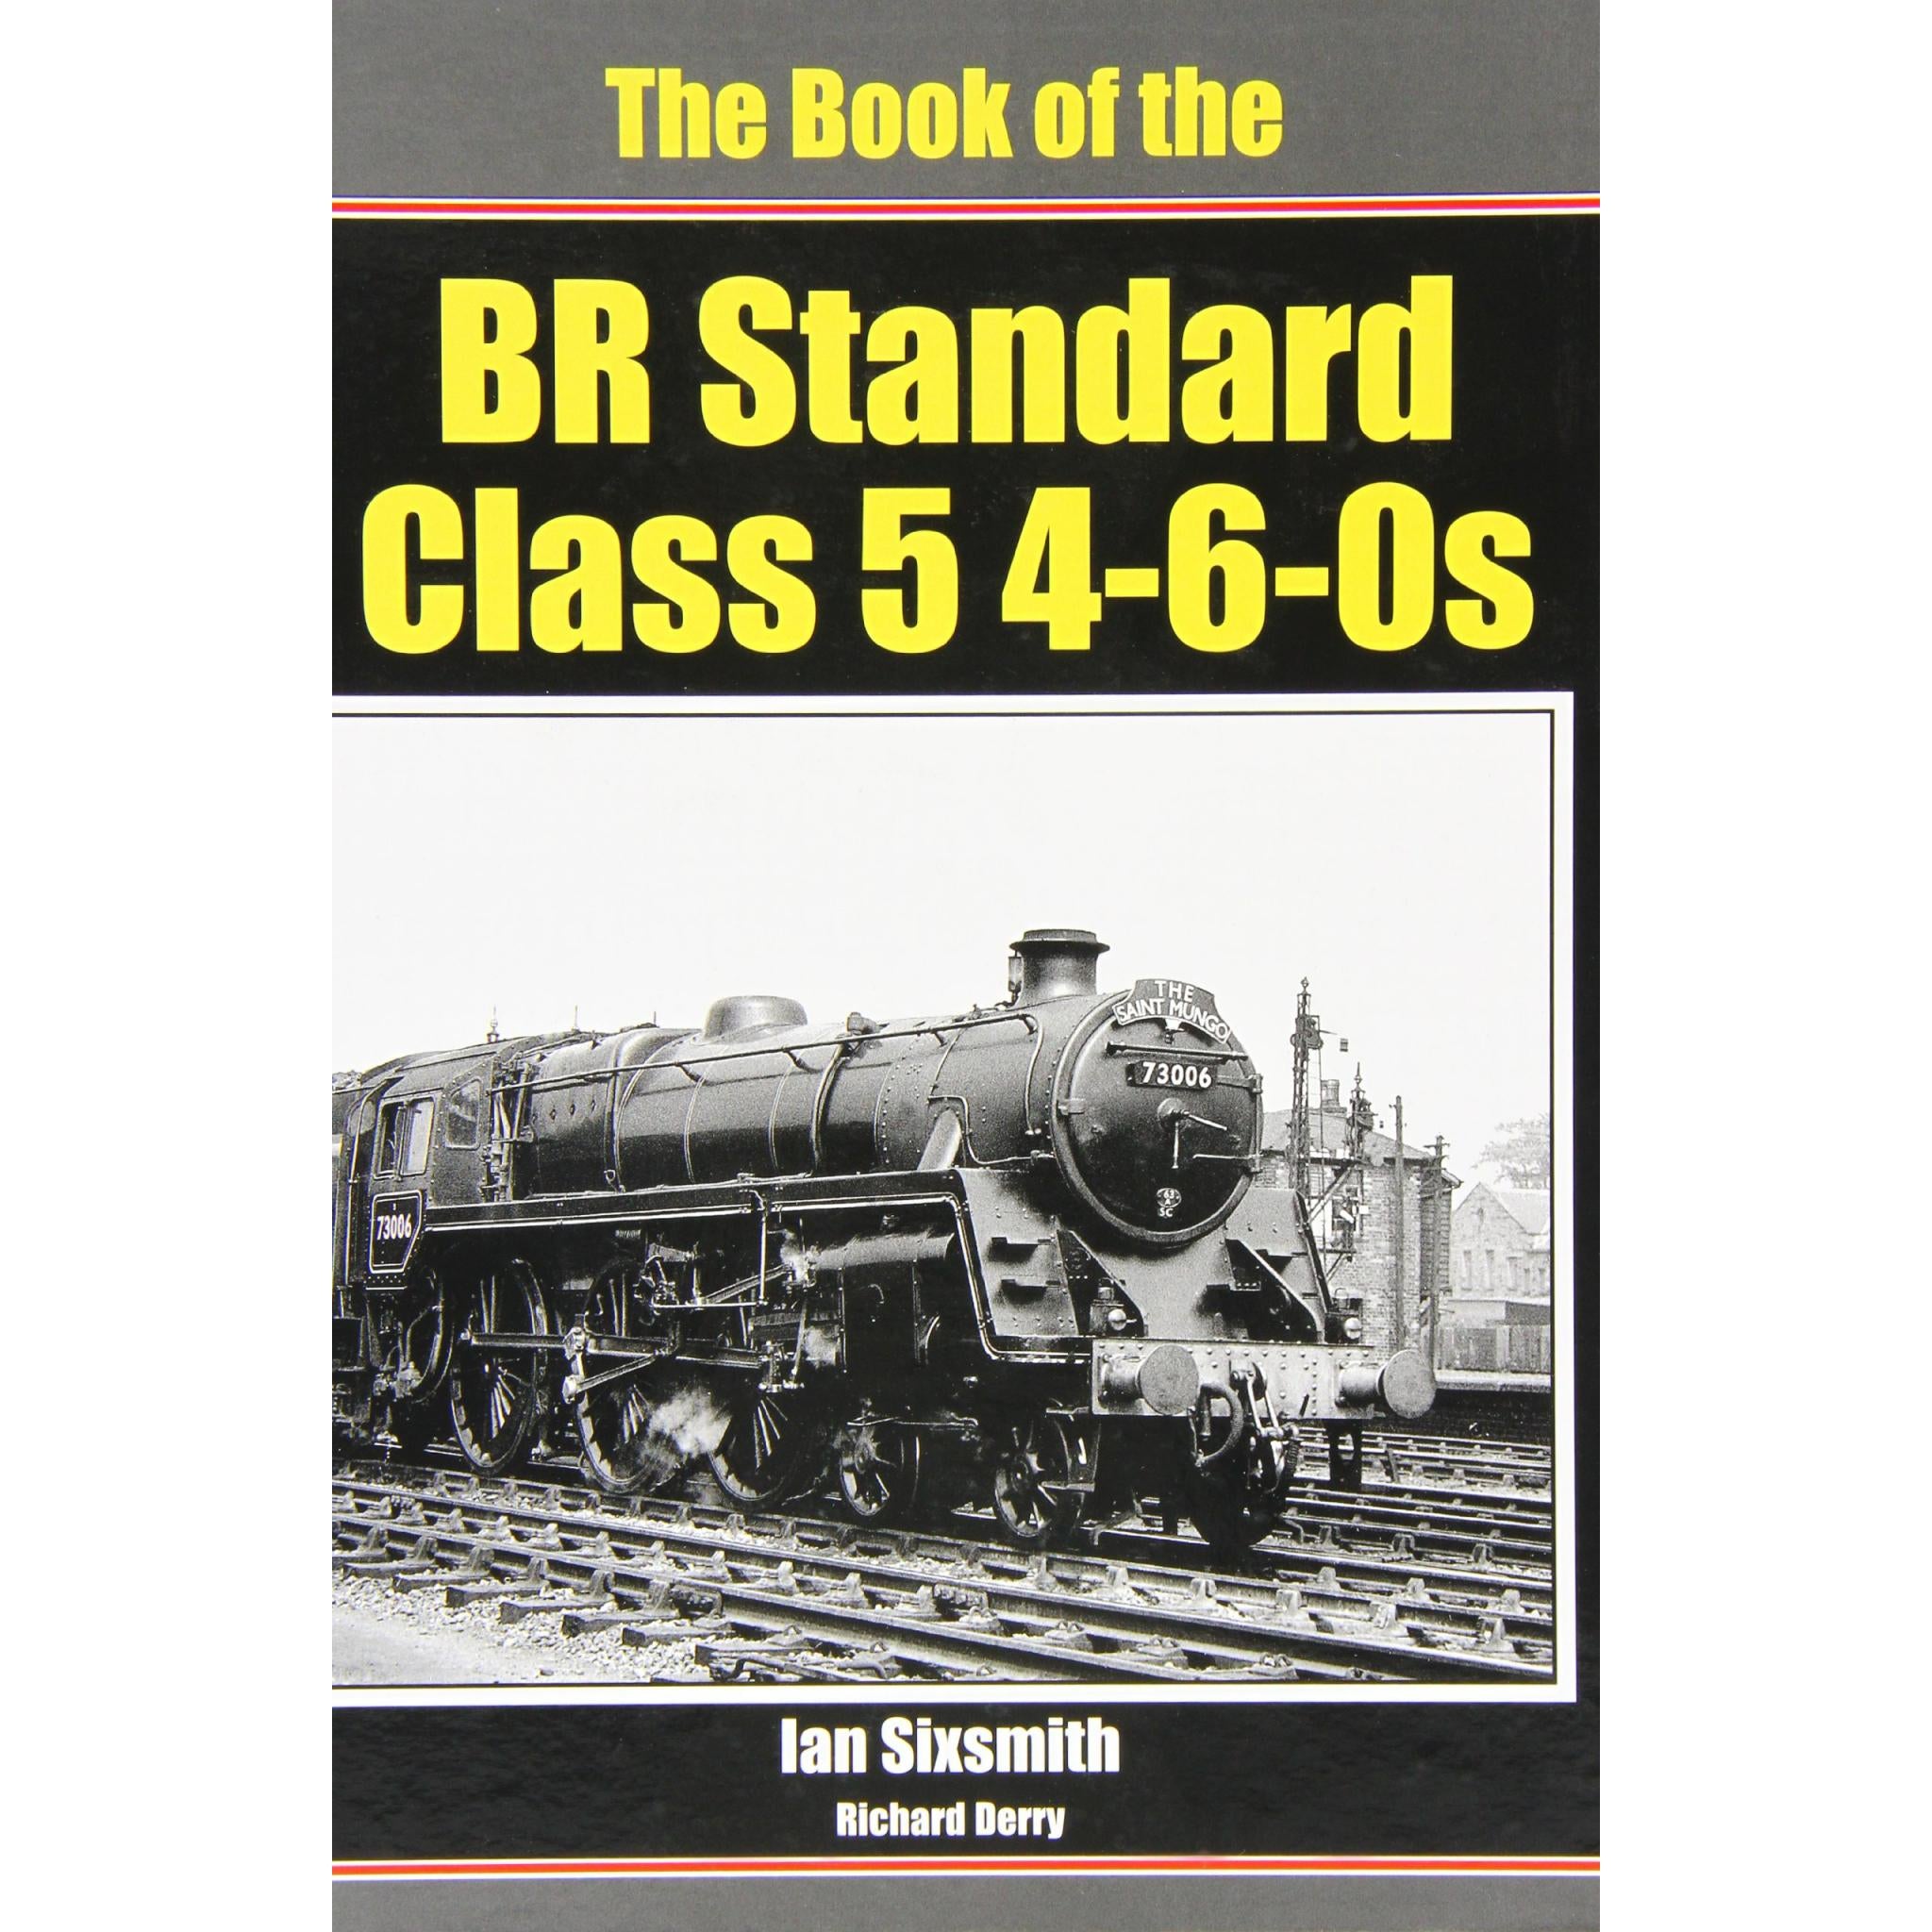 The Book of the BR STANDARD CLASS 5 4-6-0s LAST FEW COPIES